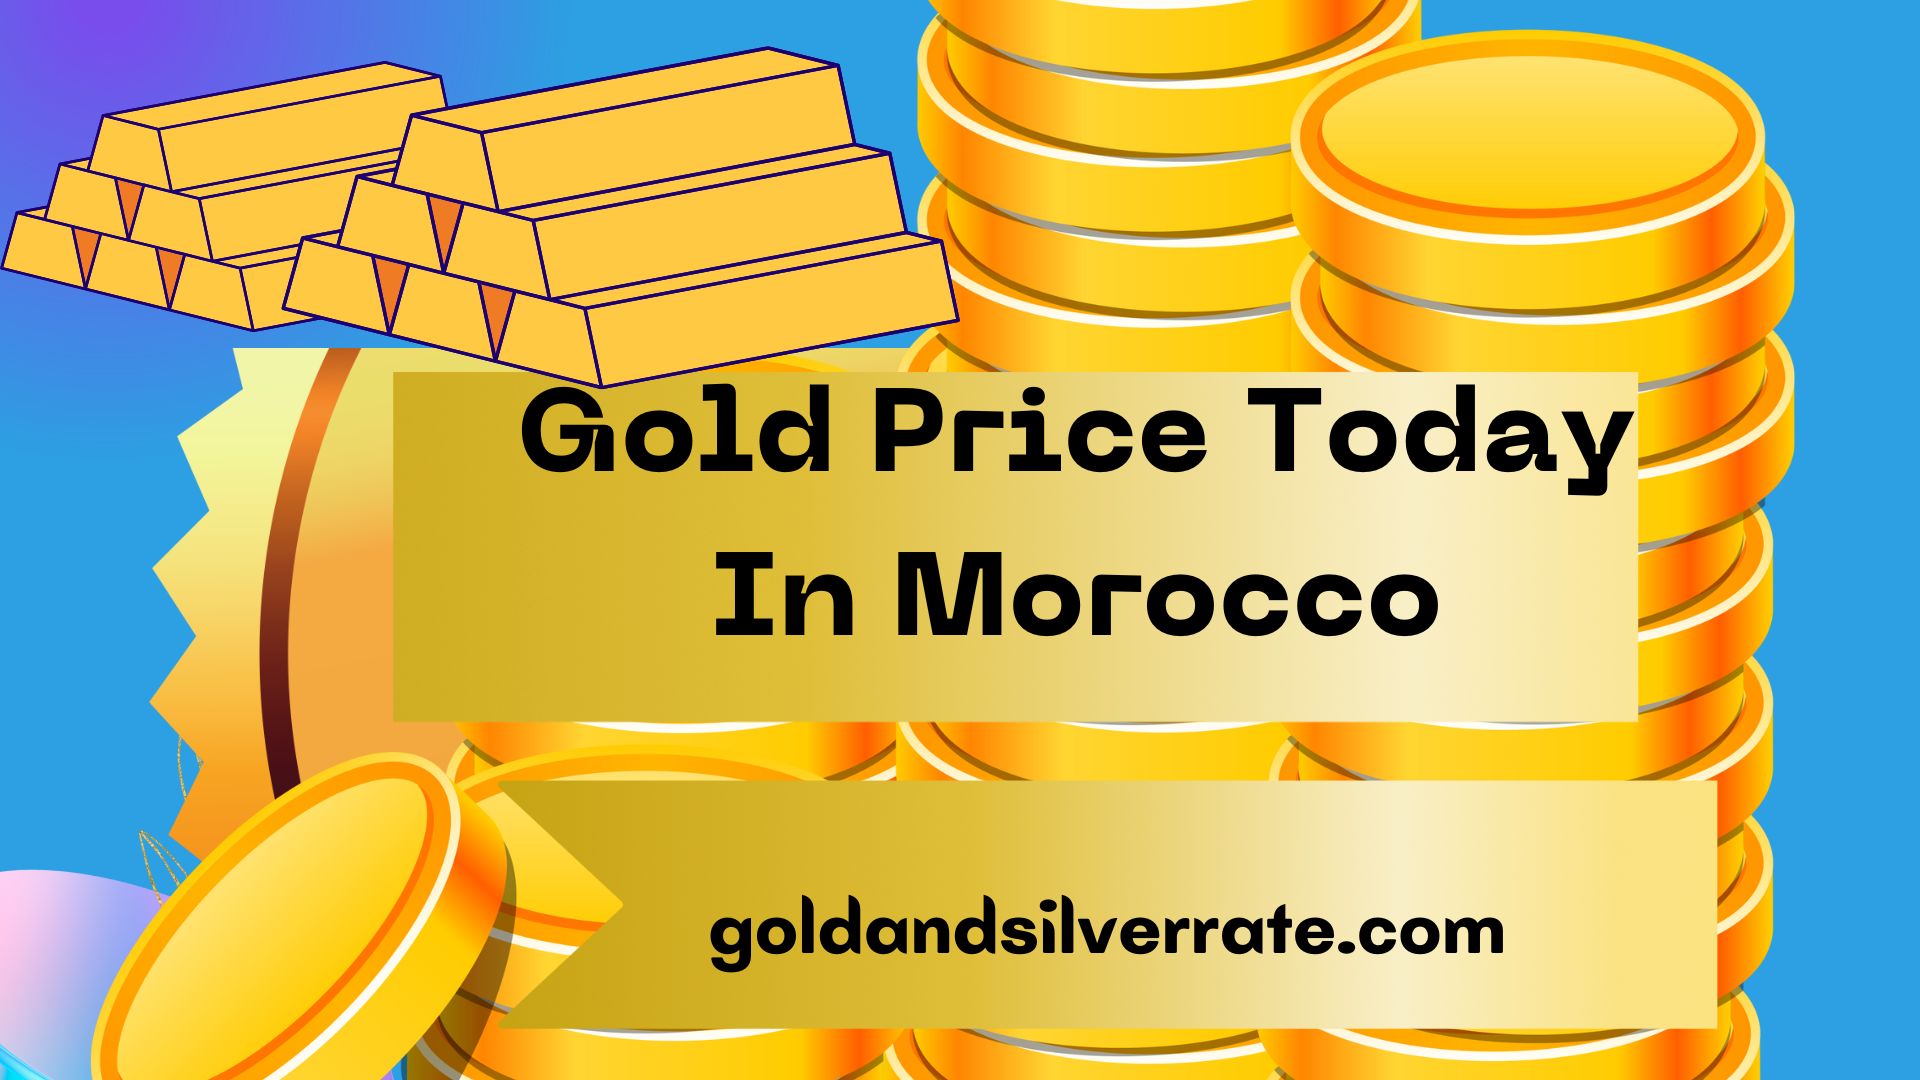 Gold Price Today In Morocco